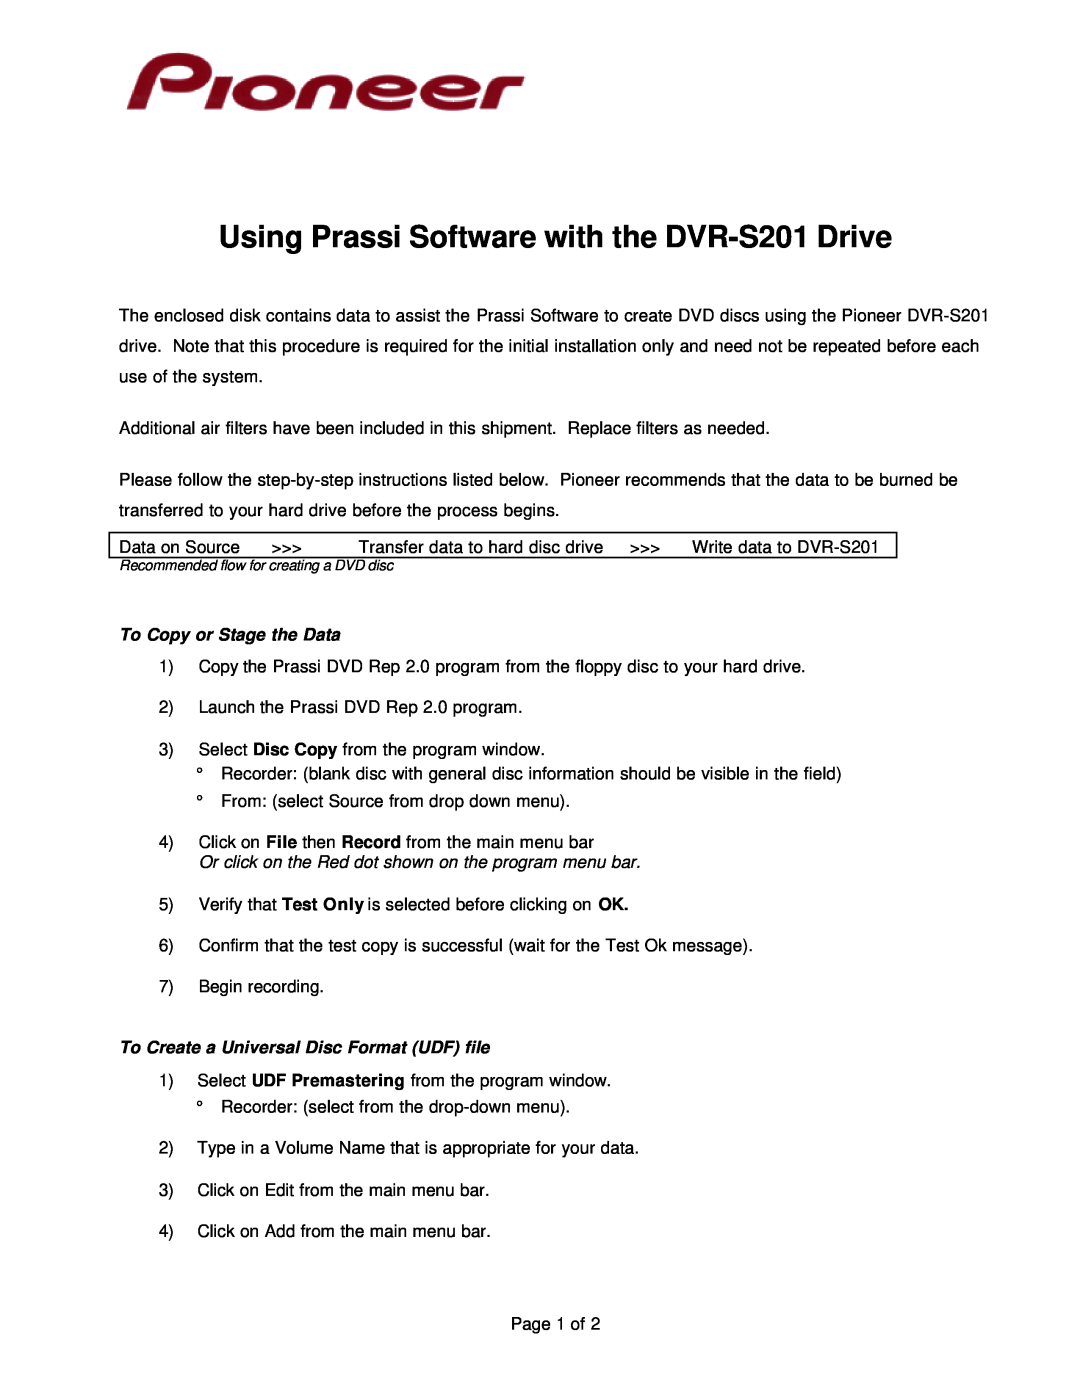 Pioneer manual Product Information Bulletin, Introduction, Page 1 of, DVR-S201 - Using Prassi Software, Bulletin # 